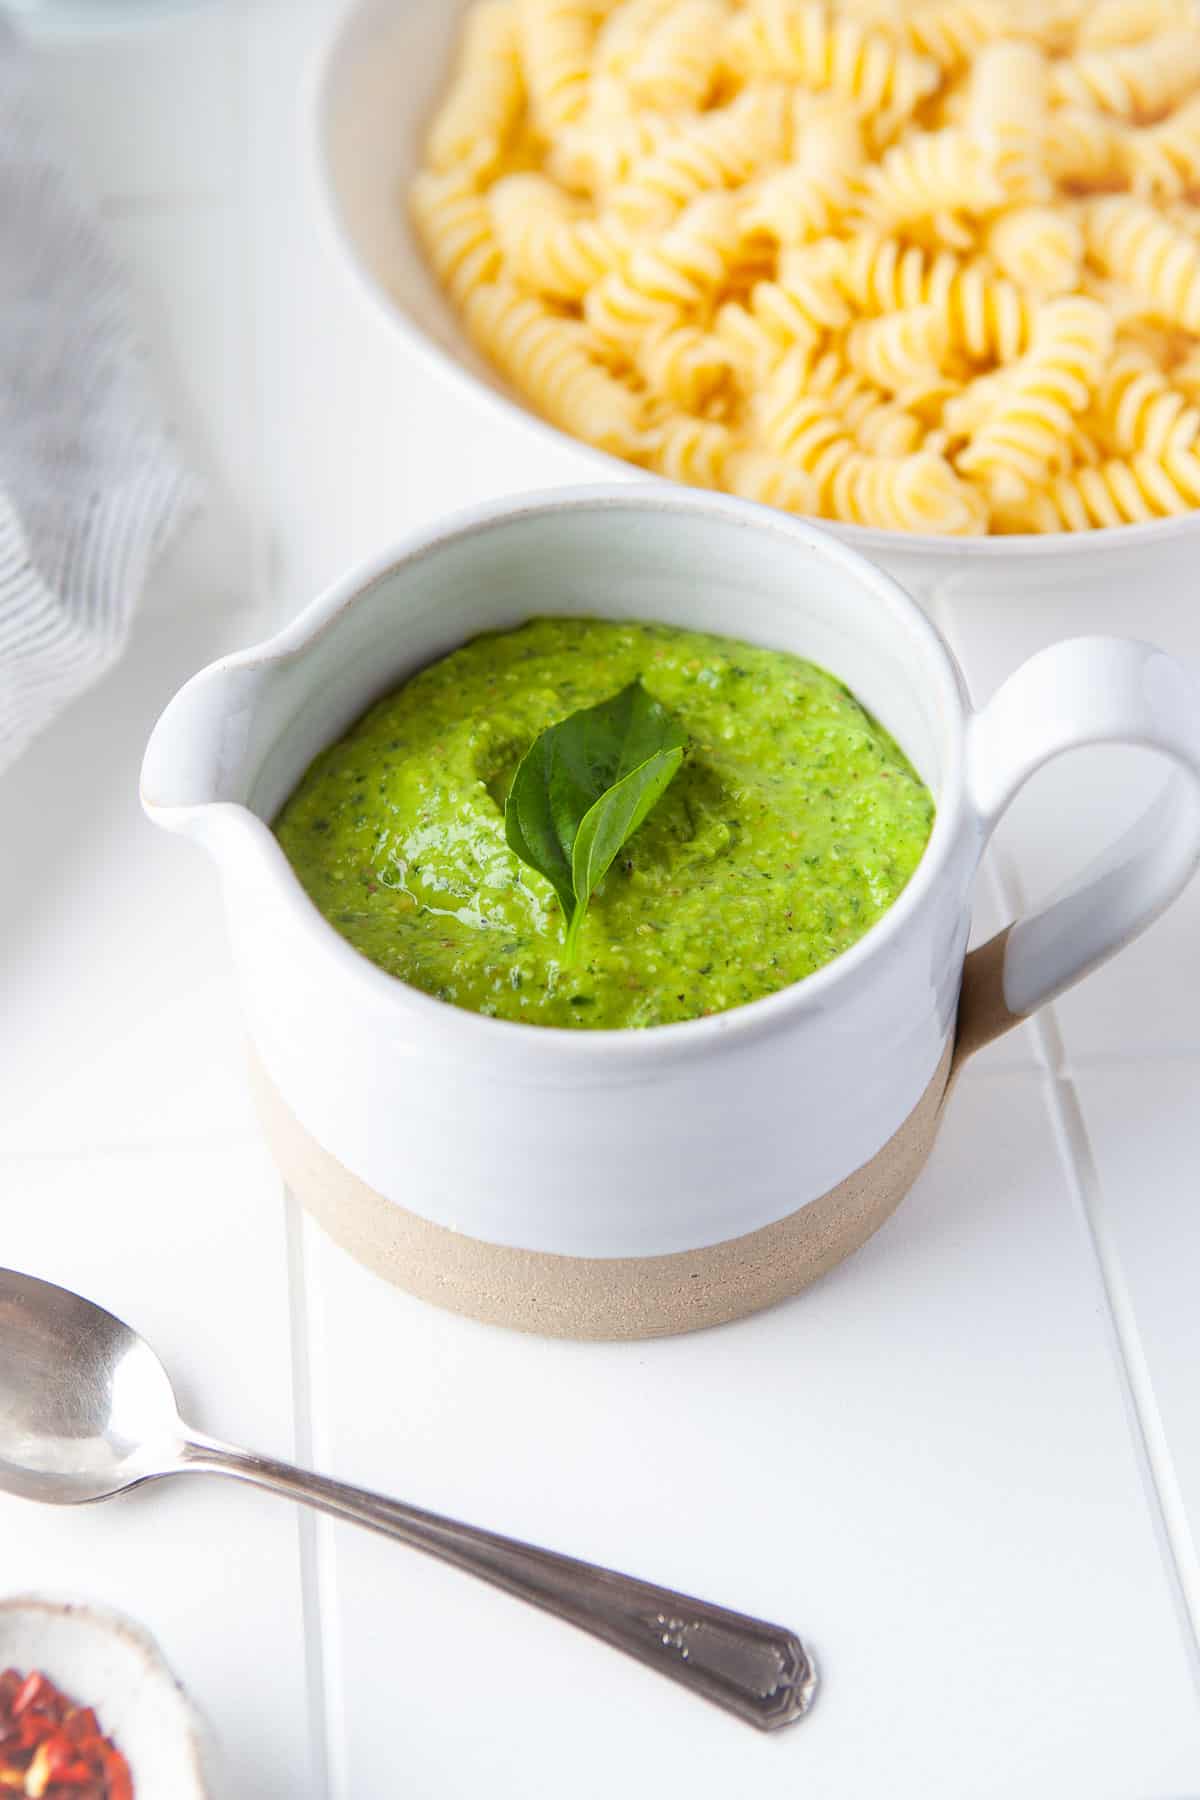 a white serving dish full of homemade pesto, with a bowl of fresh pasta in the background